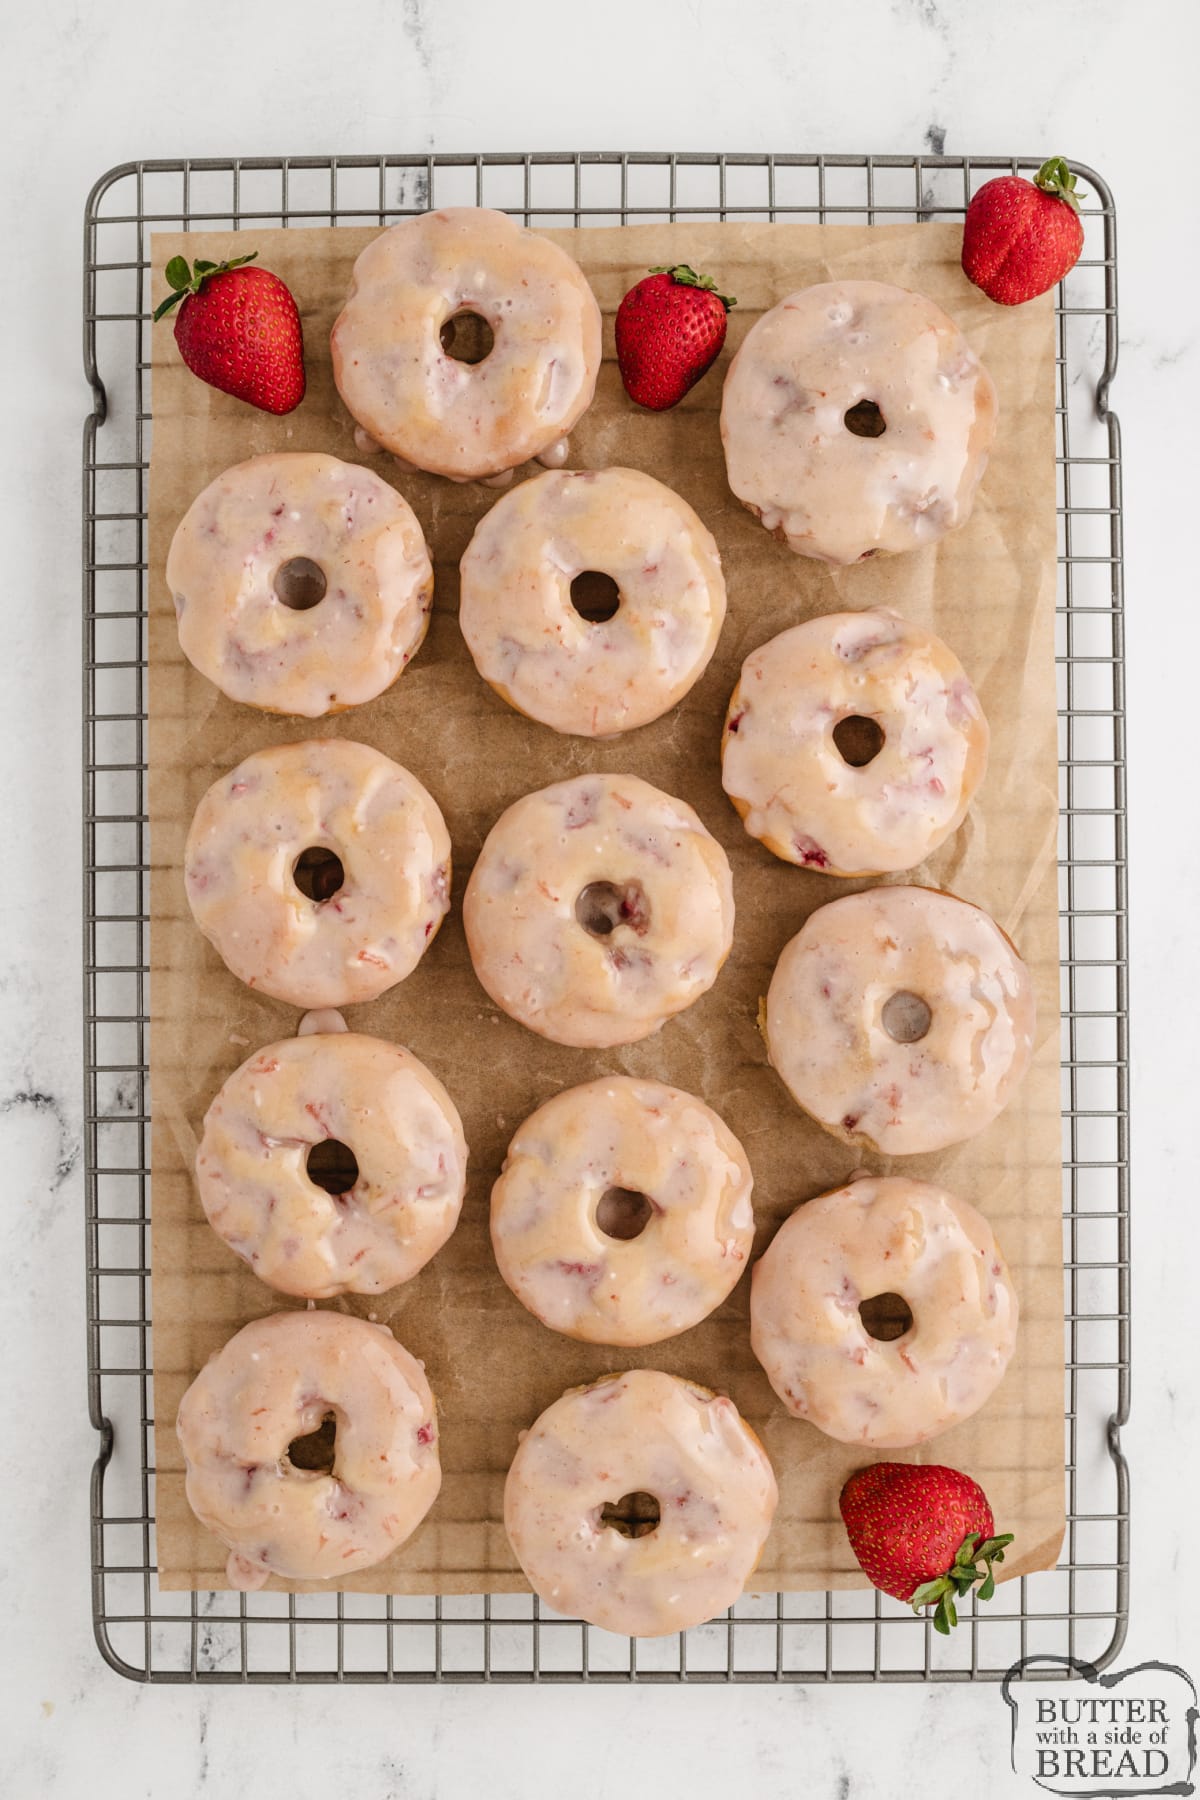 Baked donuts with strawberries. 